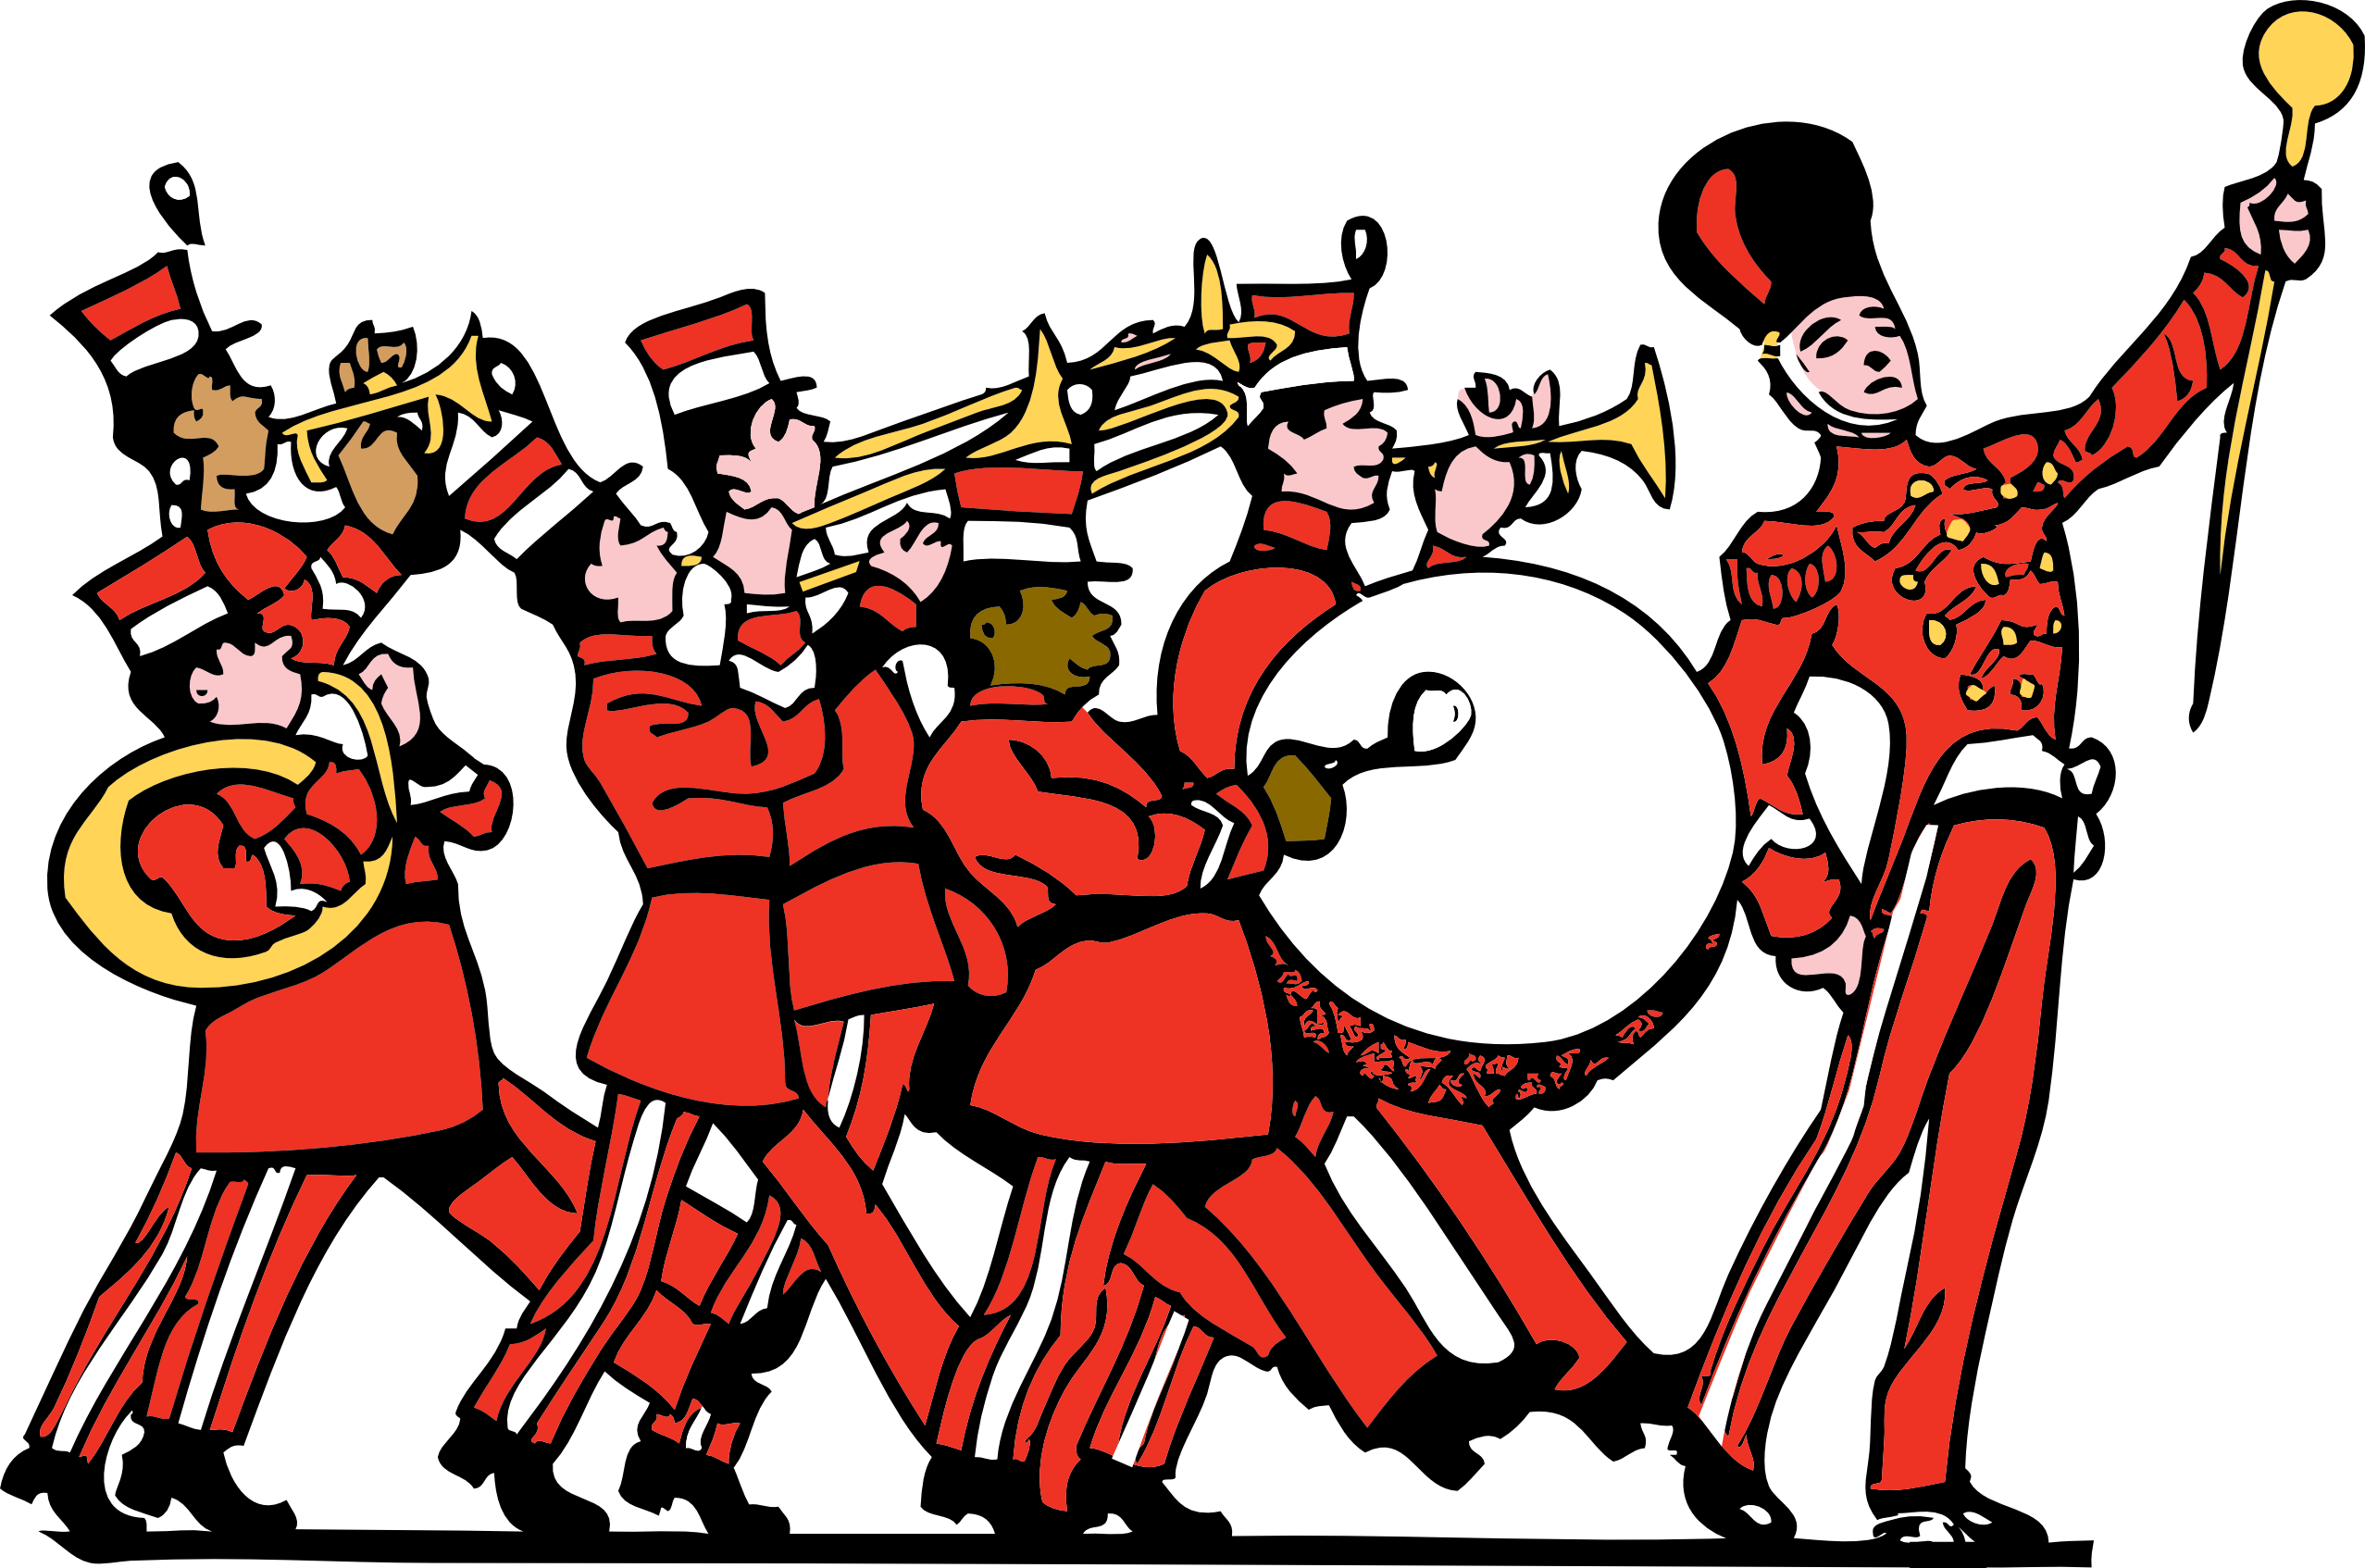 concert clipart heavy metal band